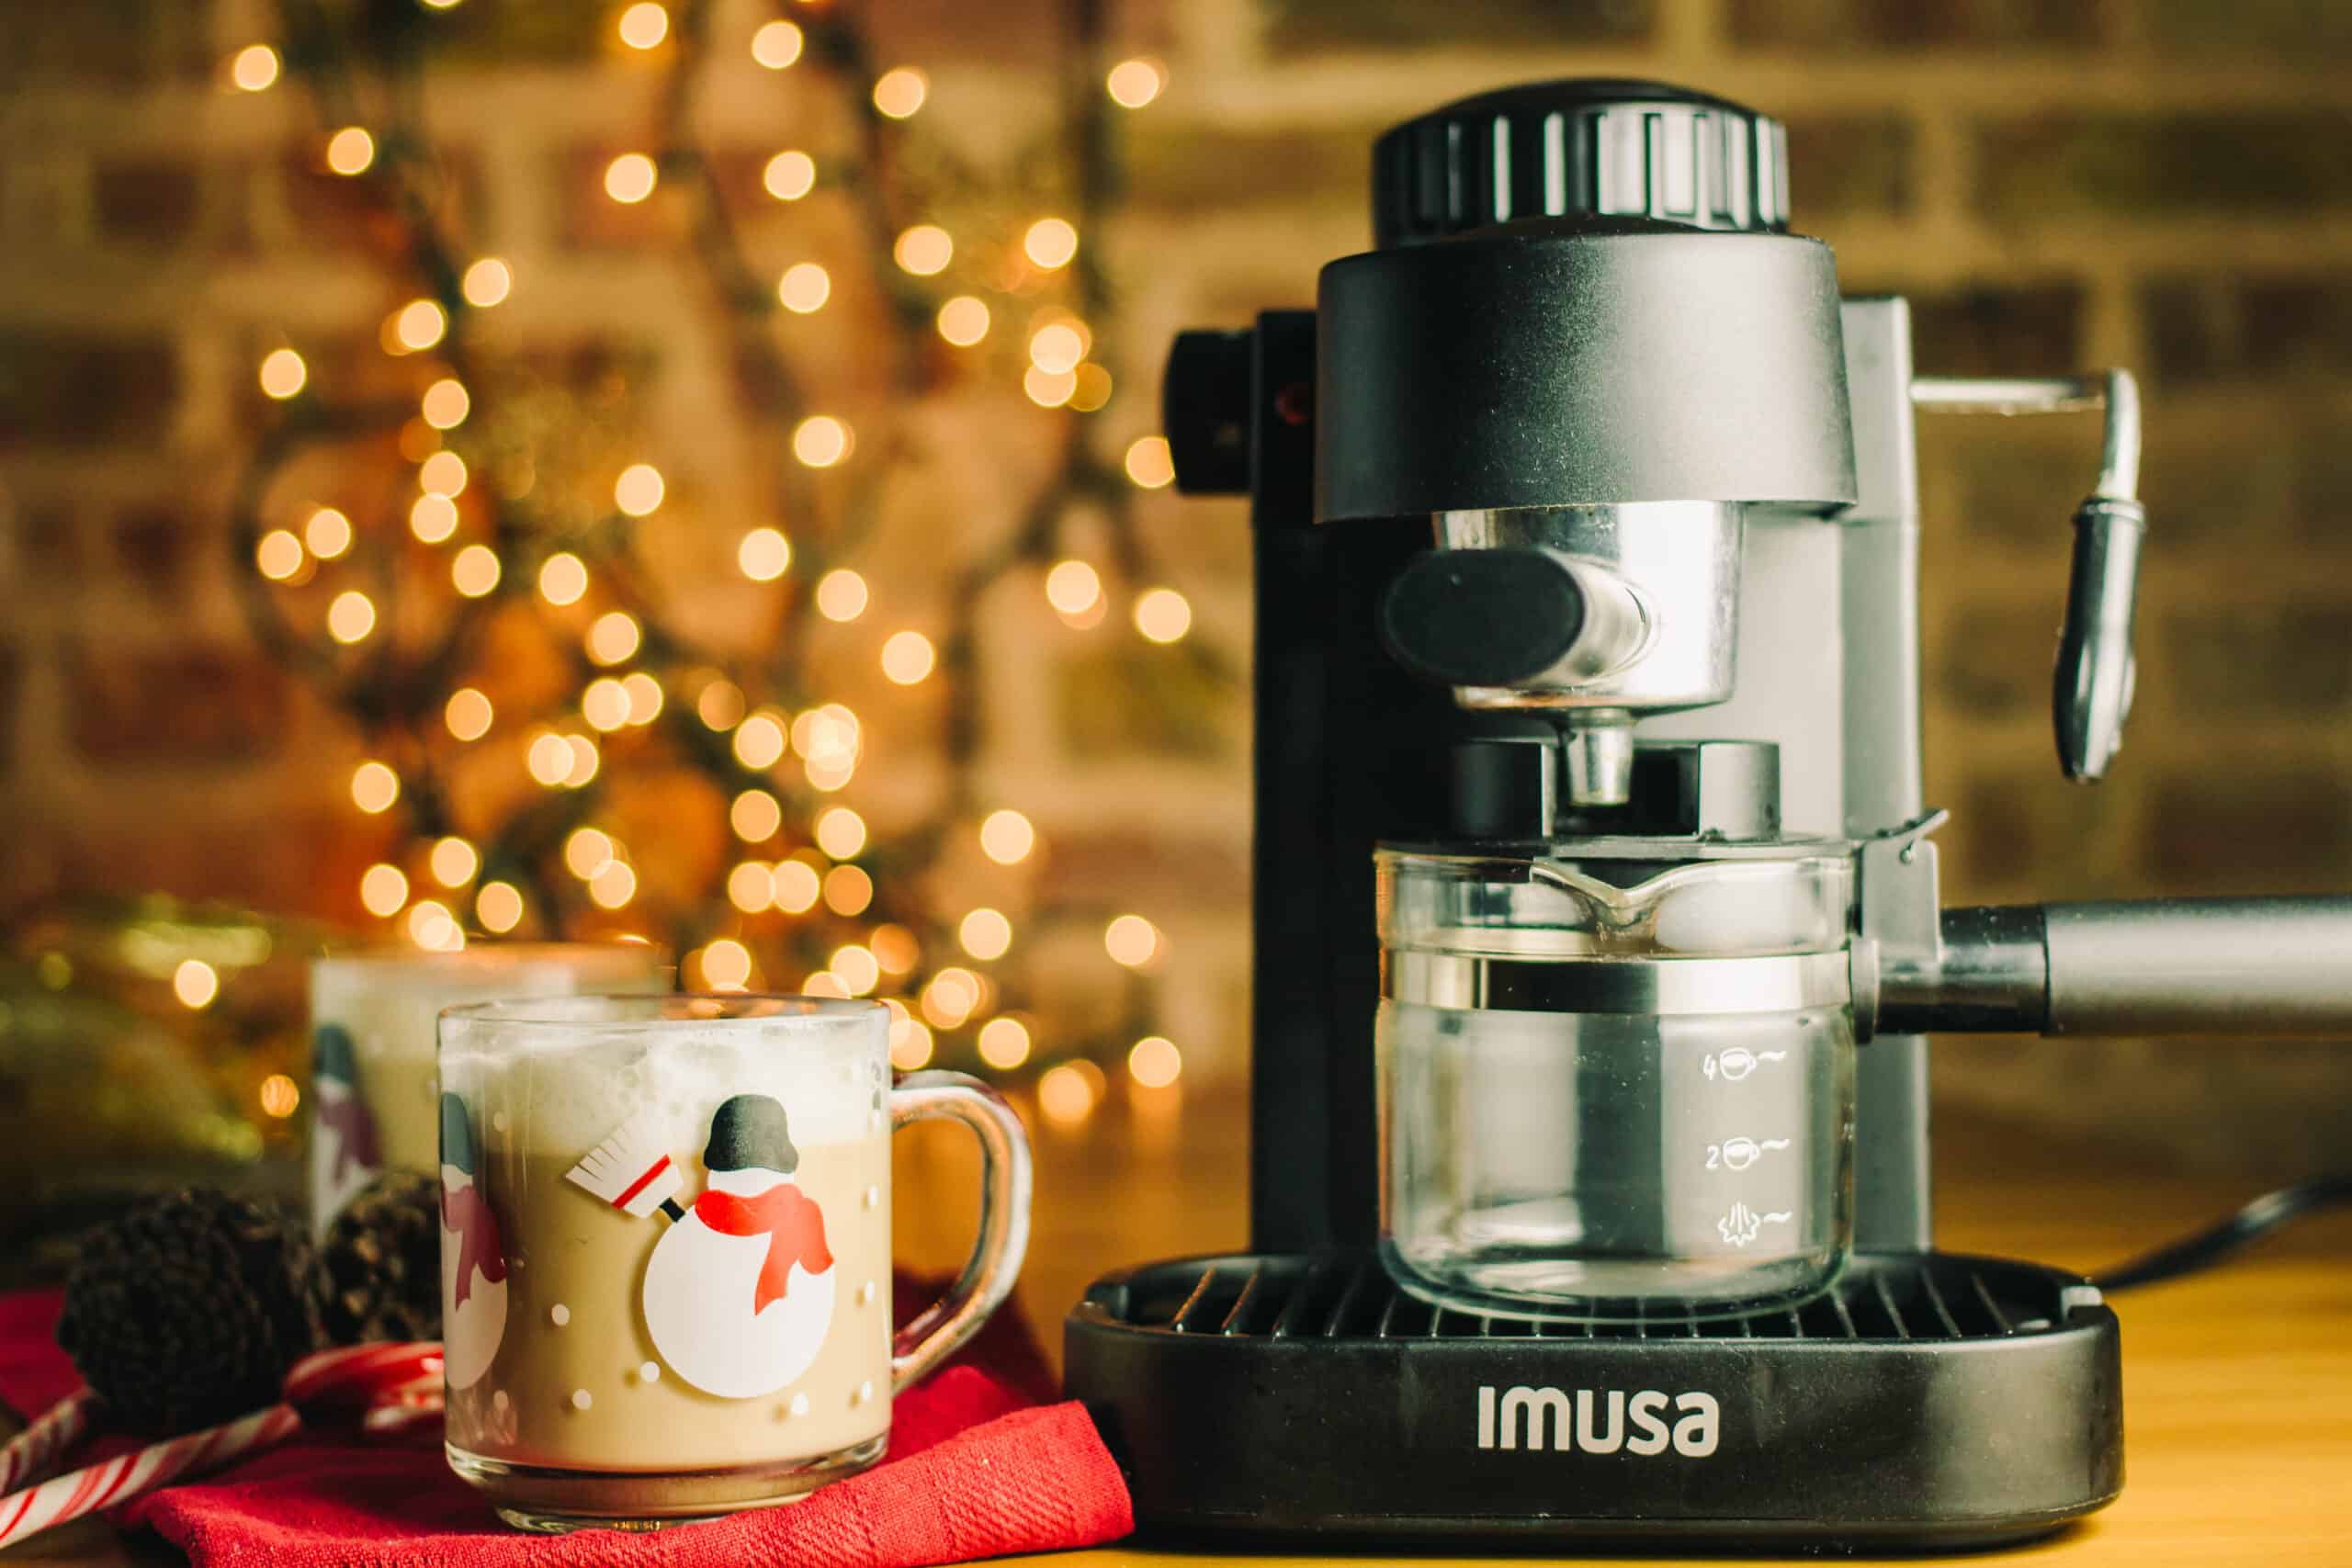 imusa espresso machine with twinkling lights in the background and snowmen mugs